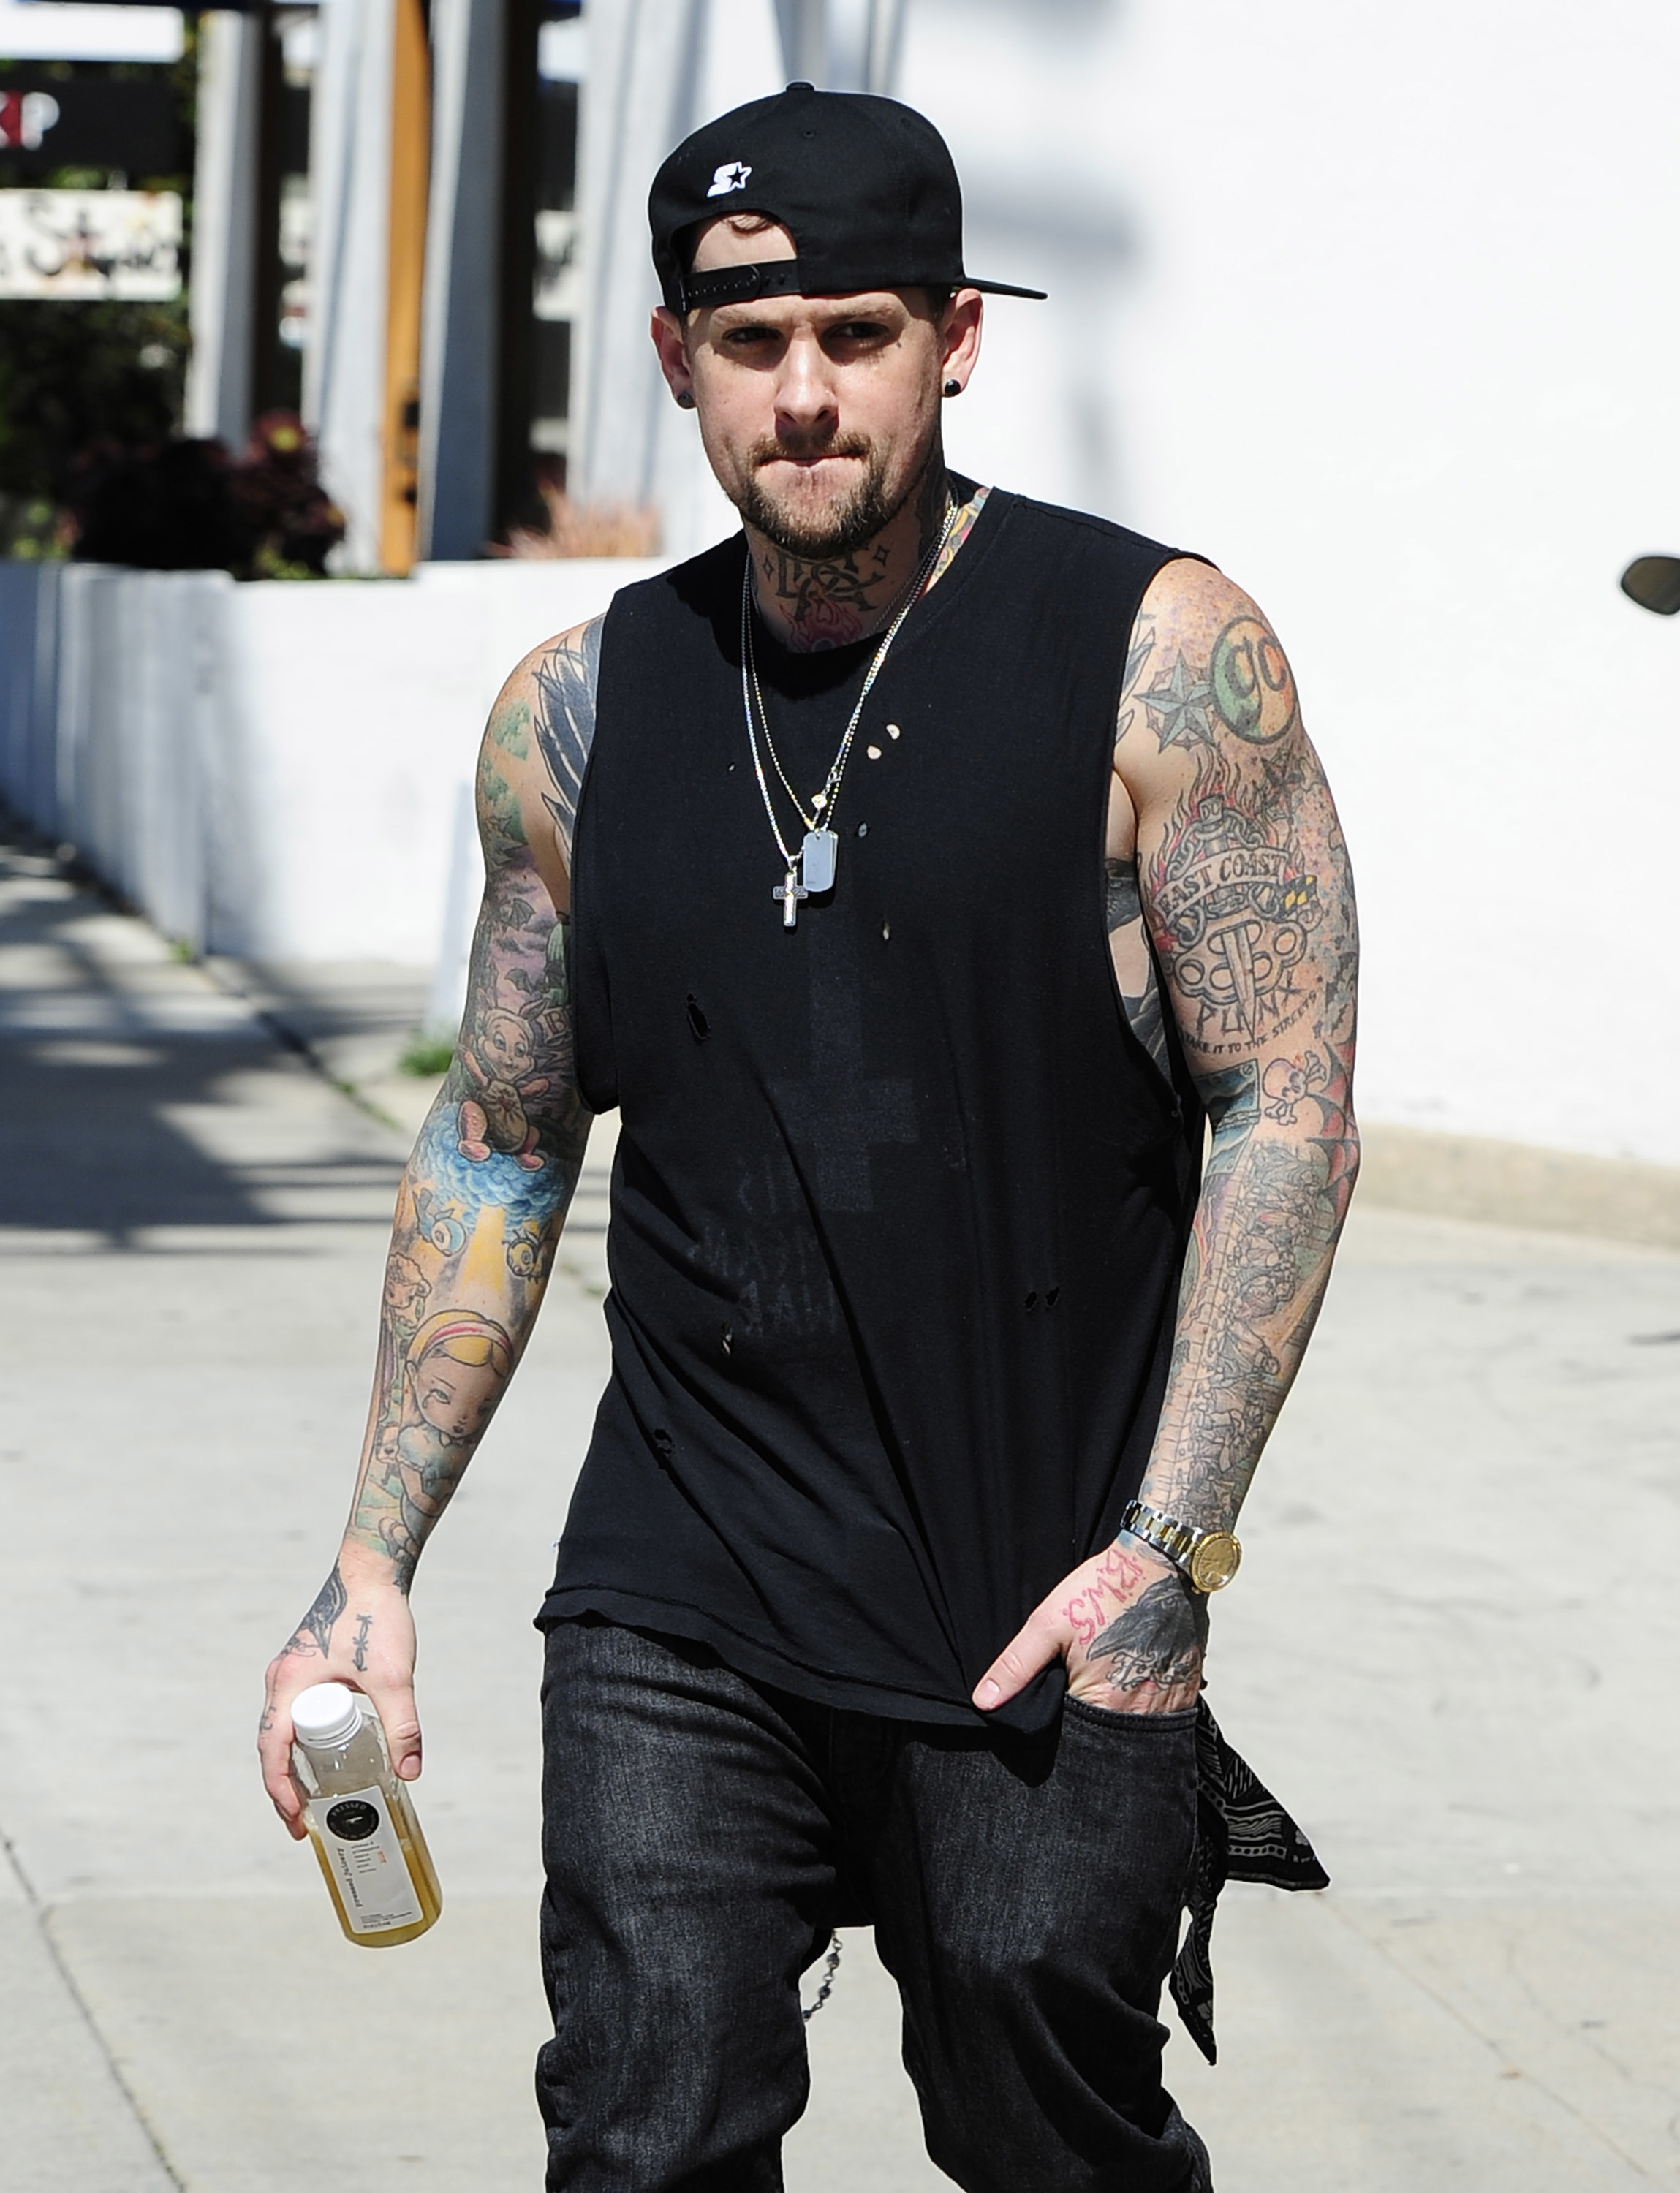 Benji and Joel Madden of Good Charlotte champion tattoos in sports  Page 2   ESPN